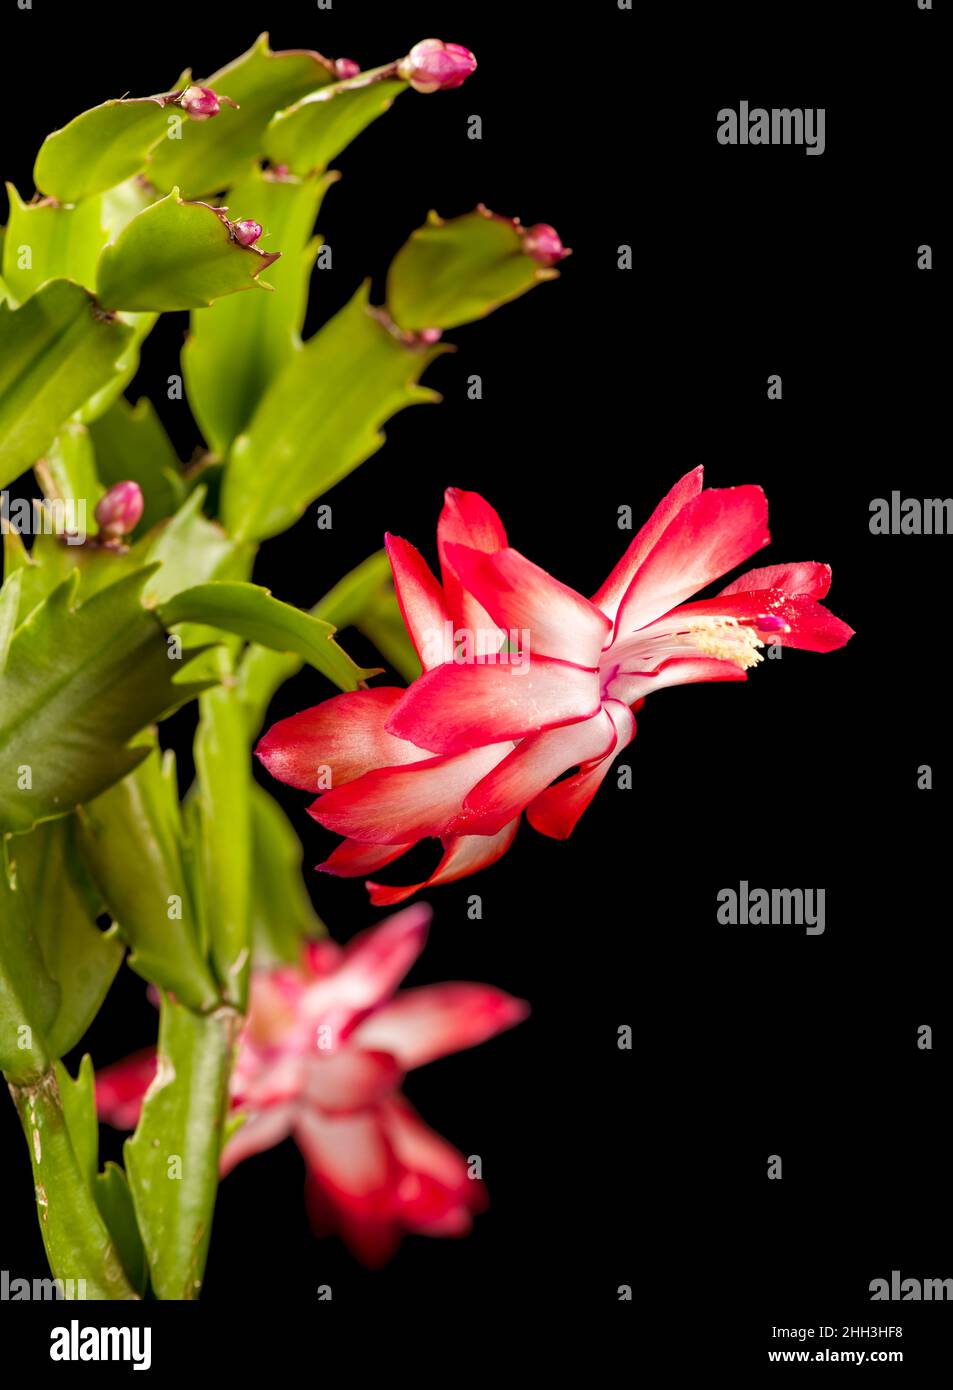 Close-up view of a Christmas cactus (lat: Schlumbergera) flower isolated on black at F8 aperture. Stock Photo